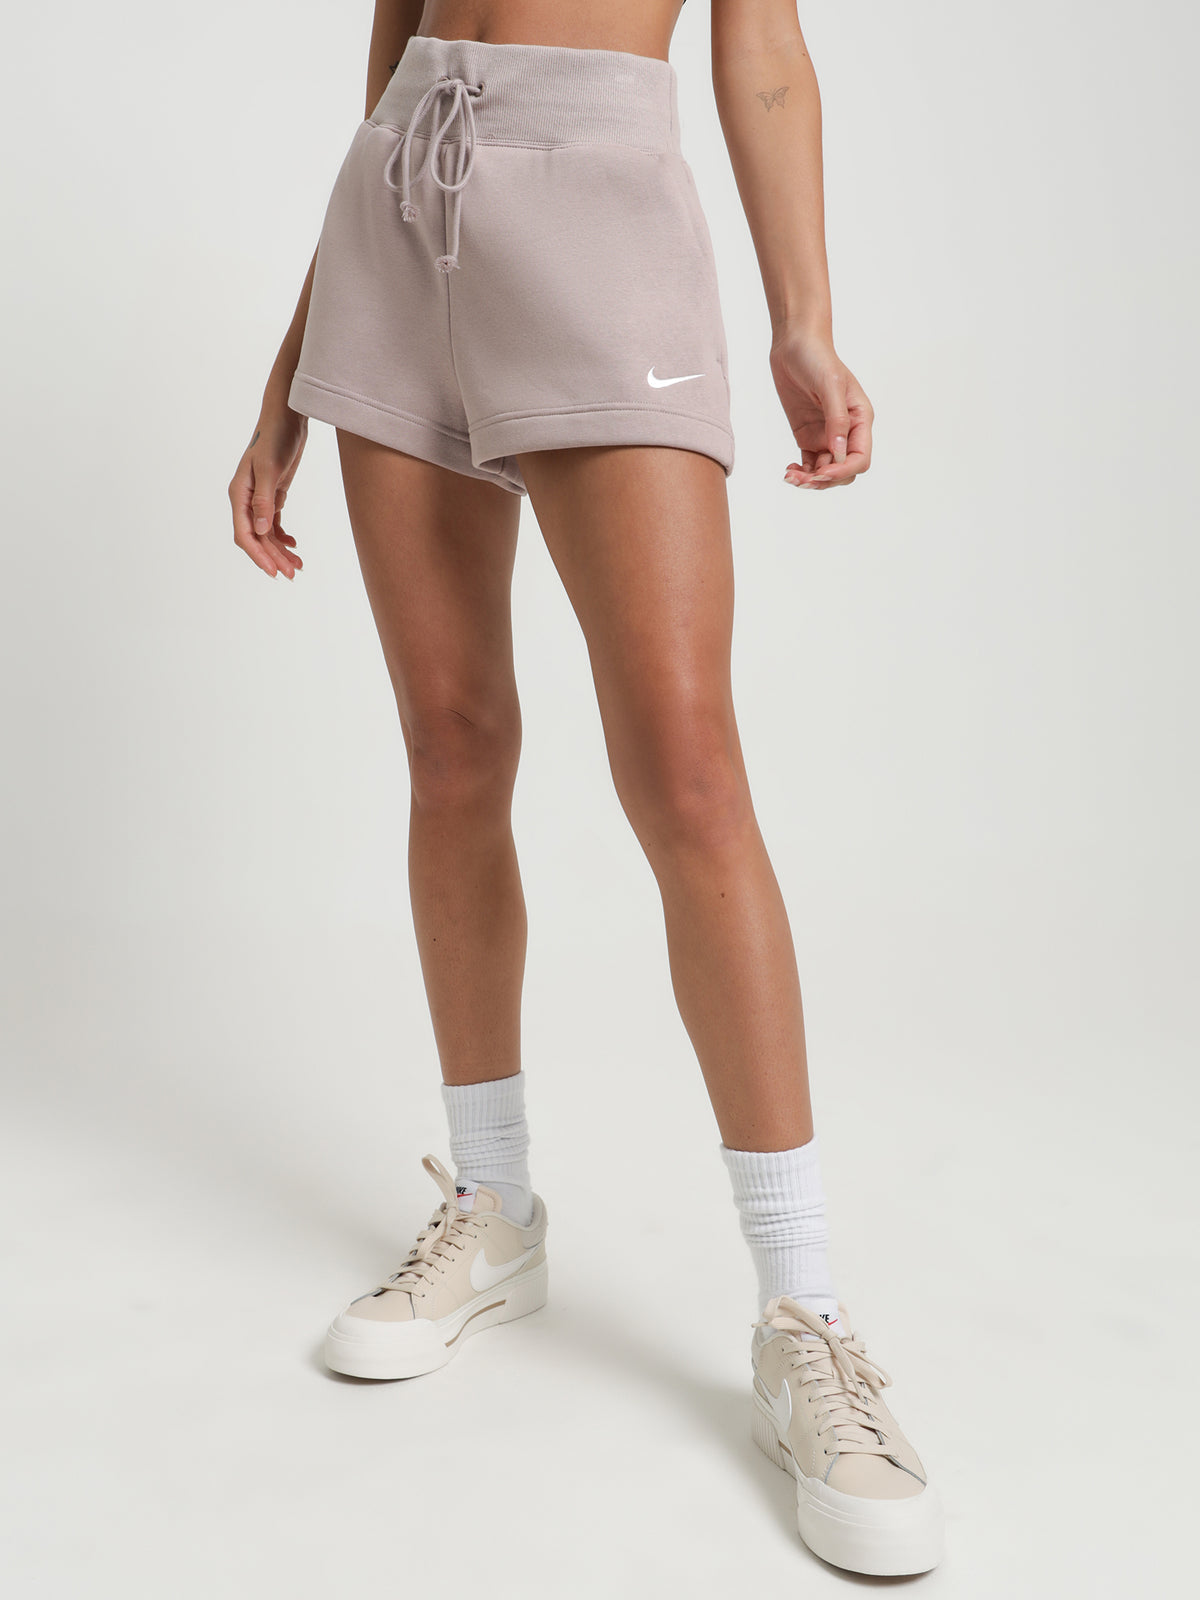 Diffused Taupe Fleece Phoenix Sportswear - Glue in Shorts Highrise Store